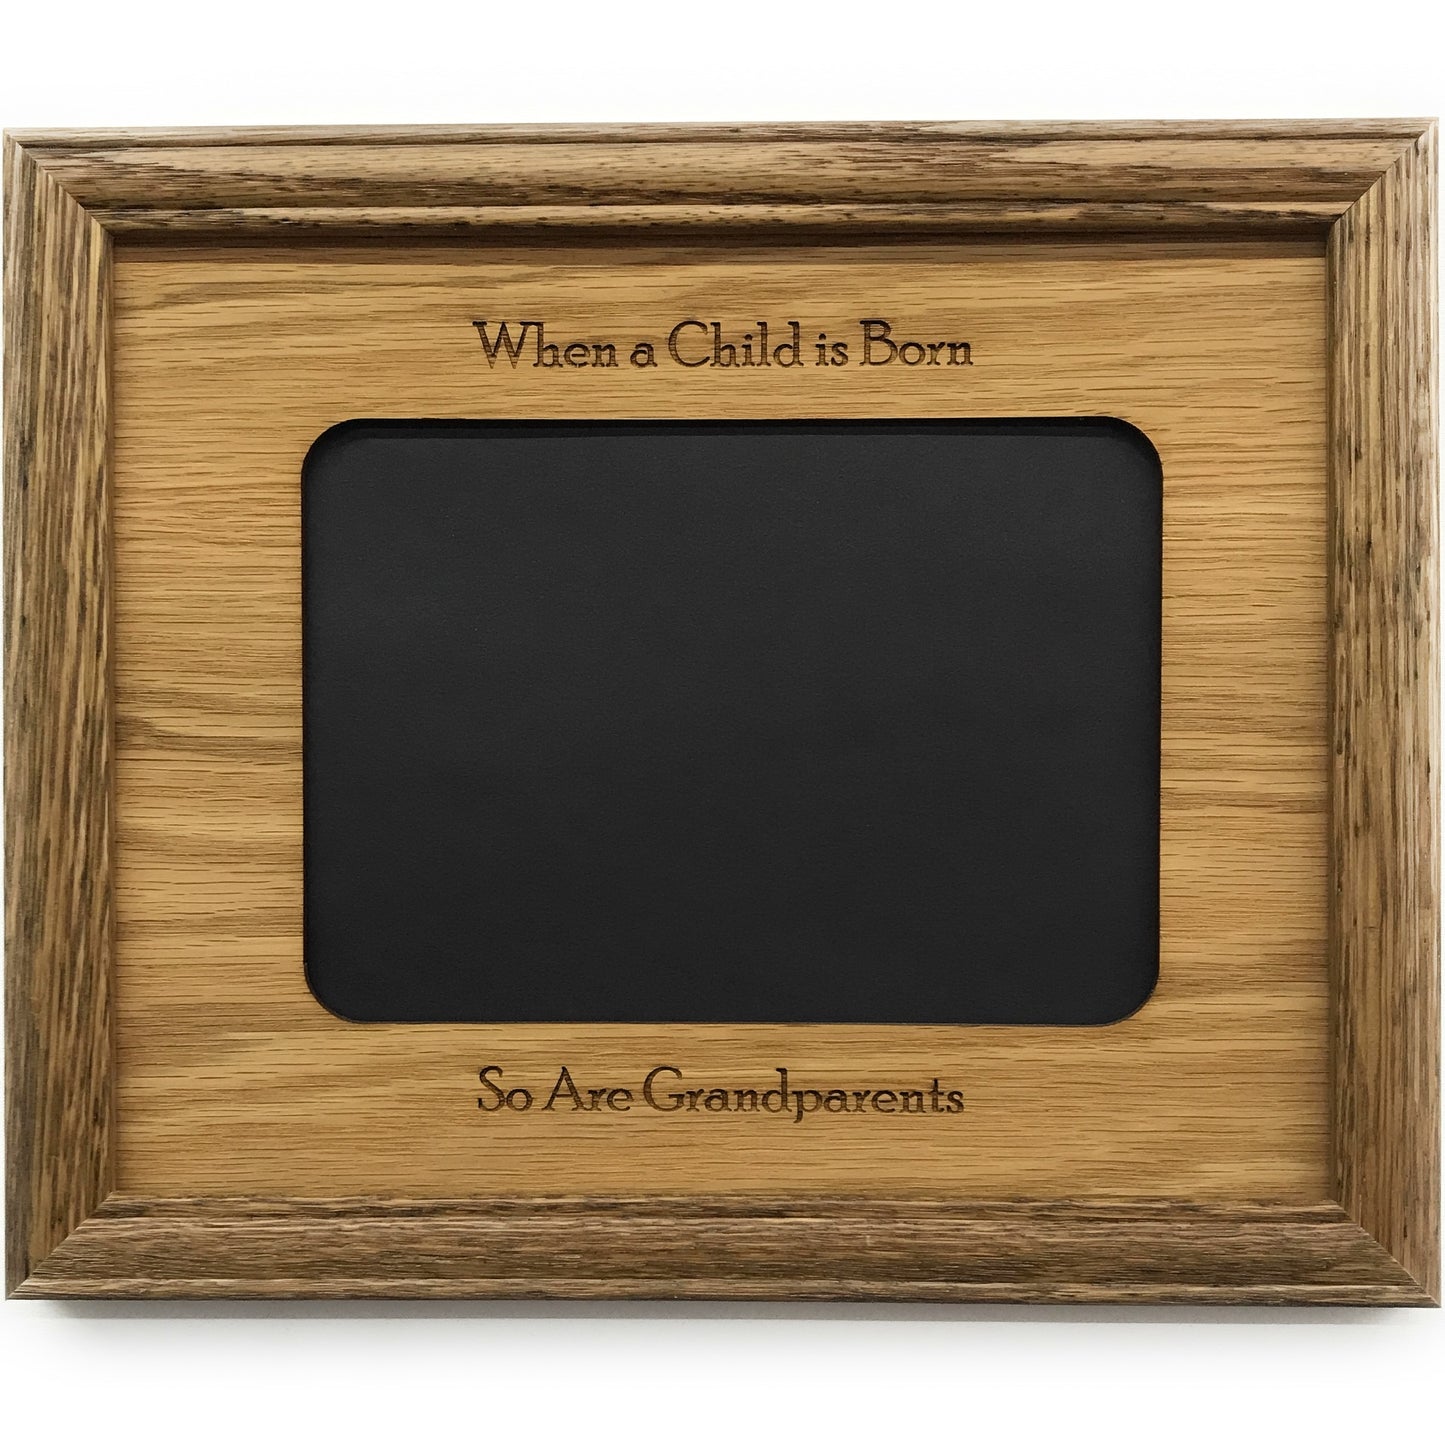 When a Child is Born Picture Frame - 8x10 Frame Hold 5x7 Photo